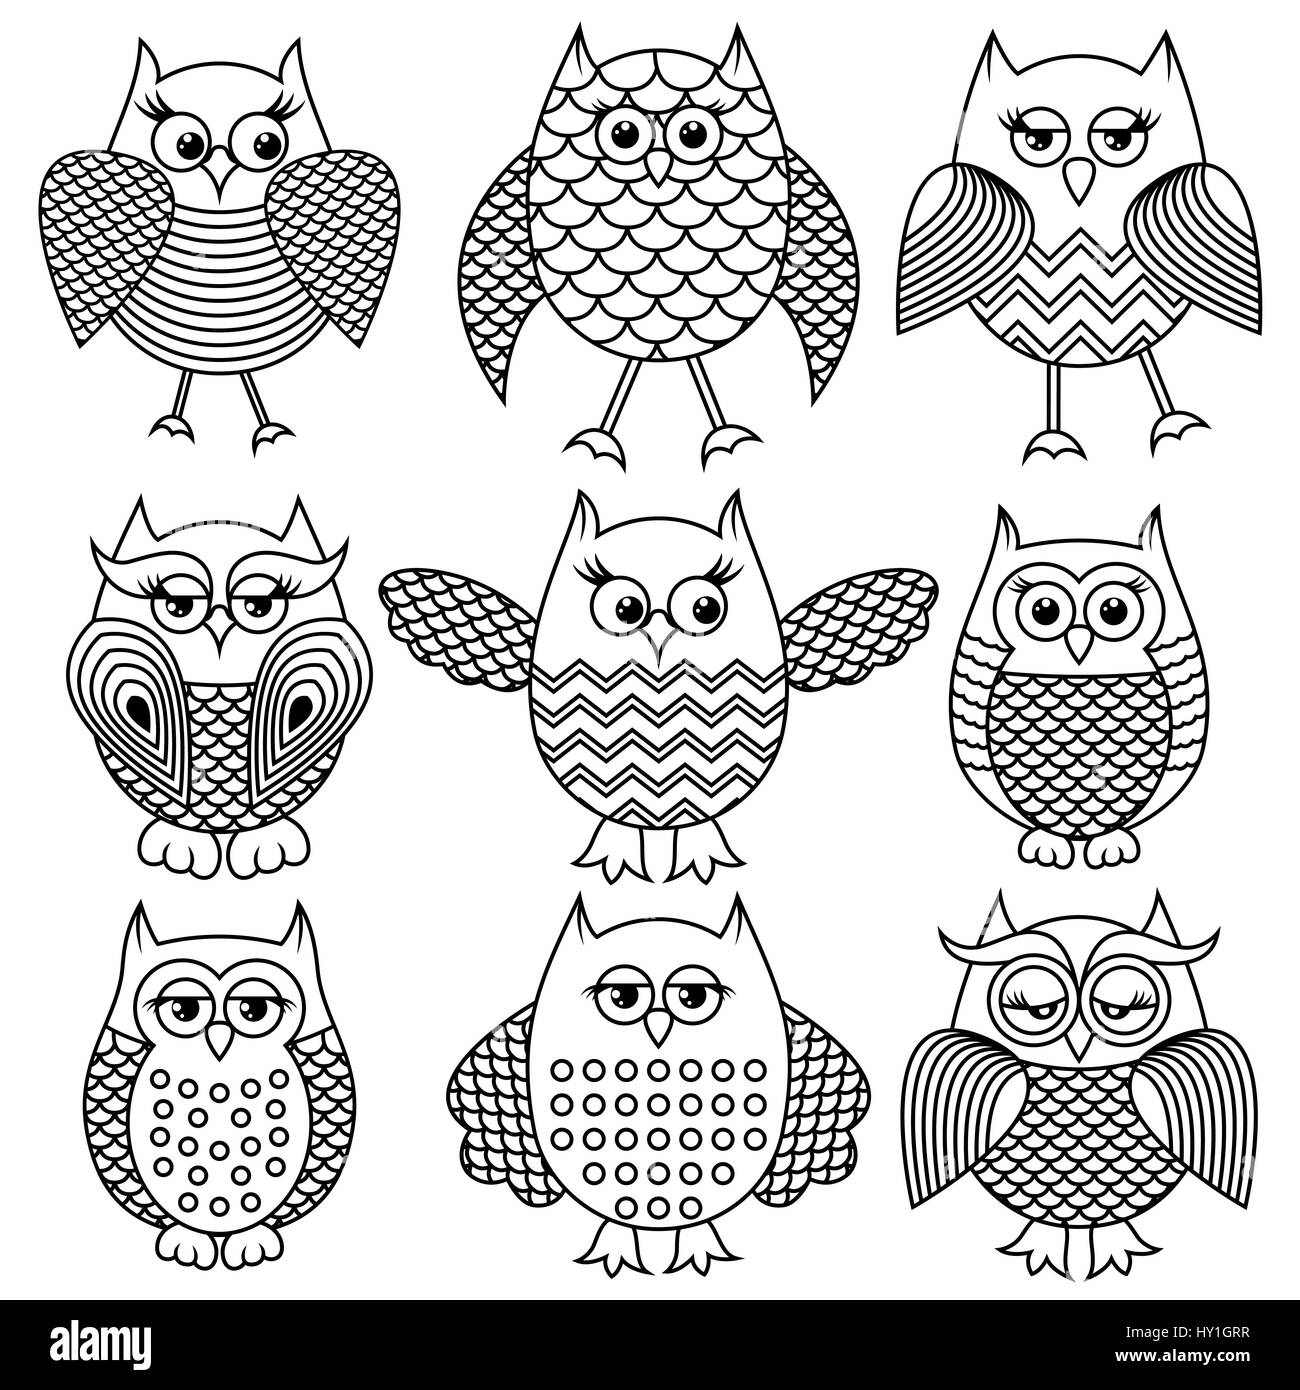 Set of nine cartoon ornate amusing owl outlines with big eyes isolated on the white background, vector illustration Stock Vector